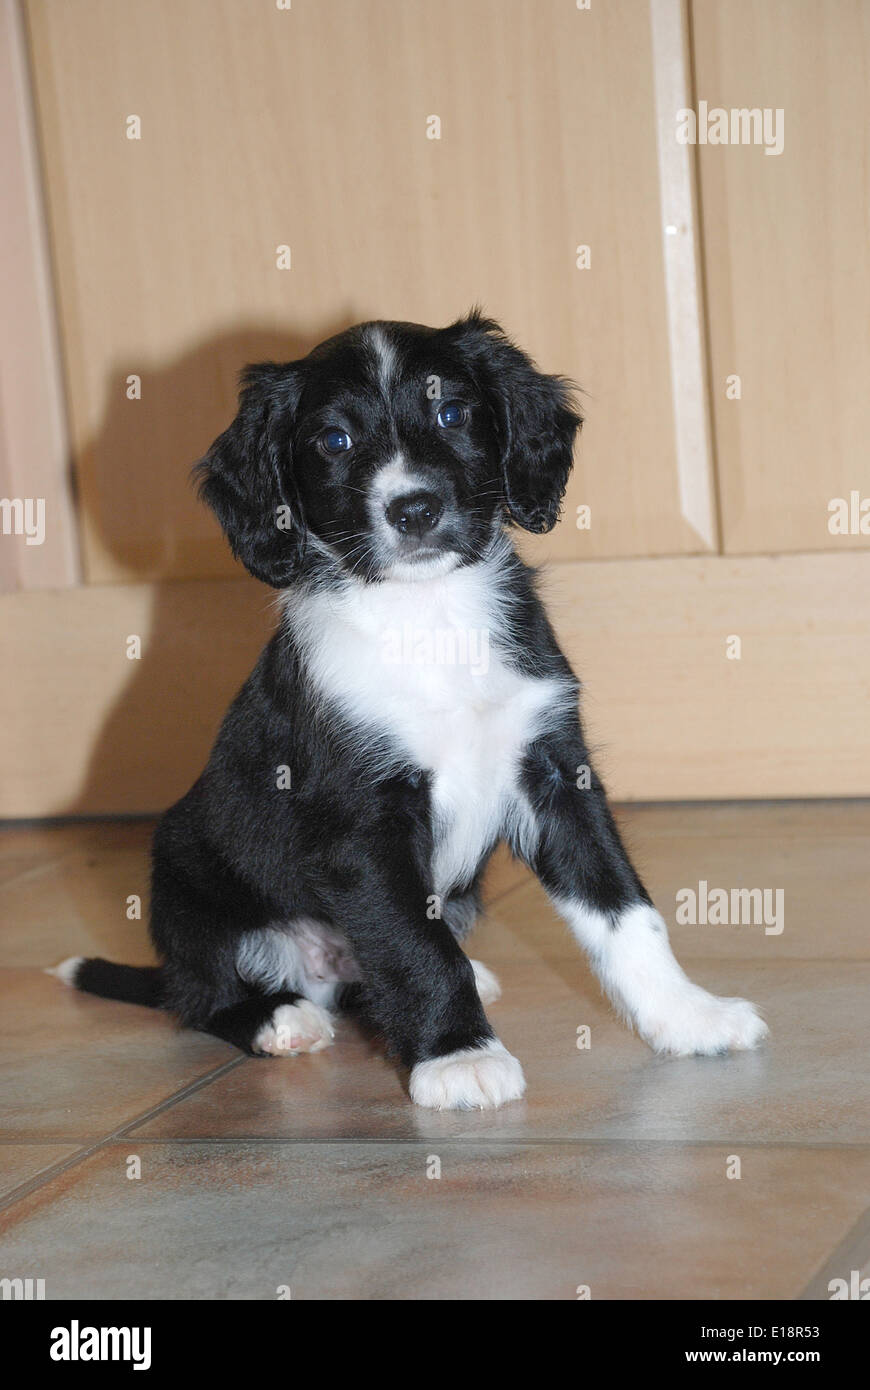 Oscar the sprollie as a puppy. He is a cross between a border collie and a  springer spaniel, a sprollie! Stock Photo - Alamy